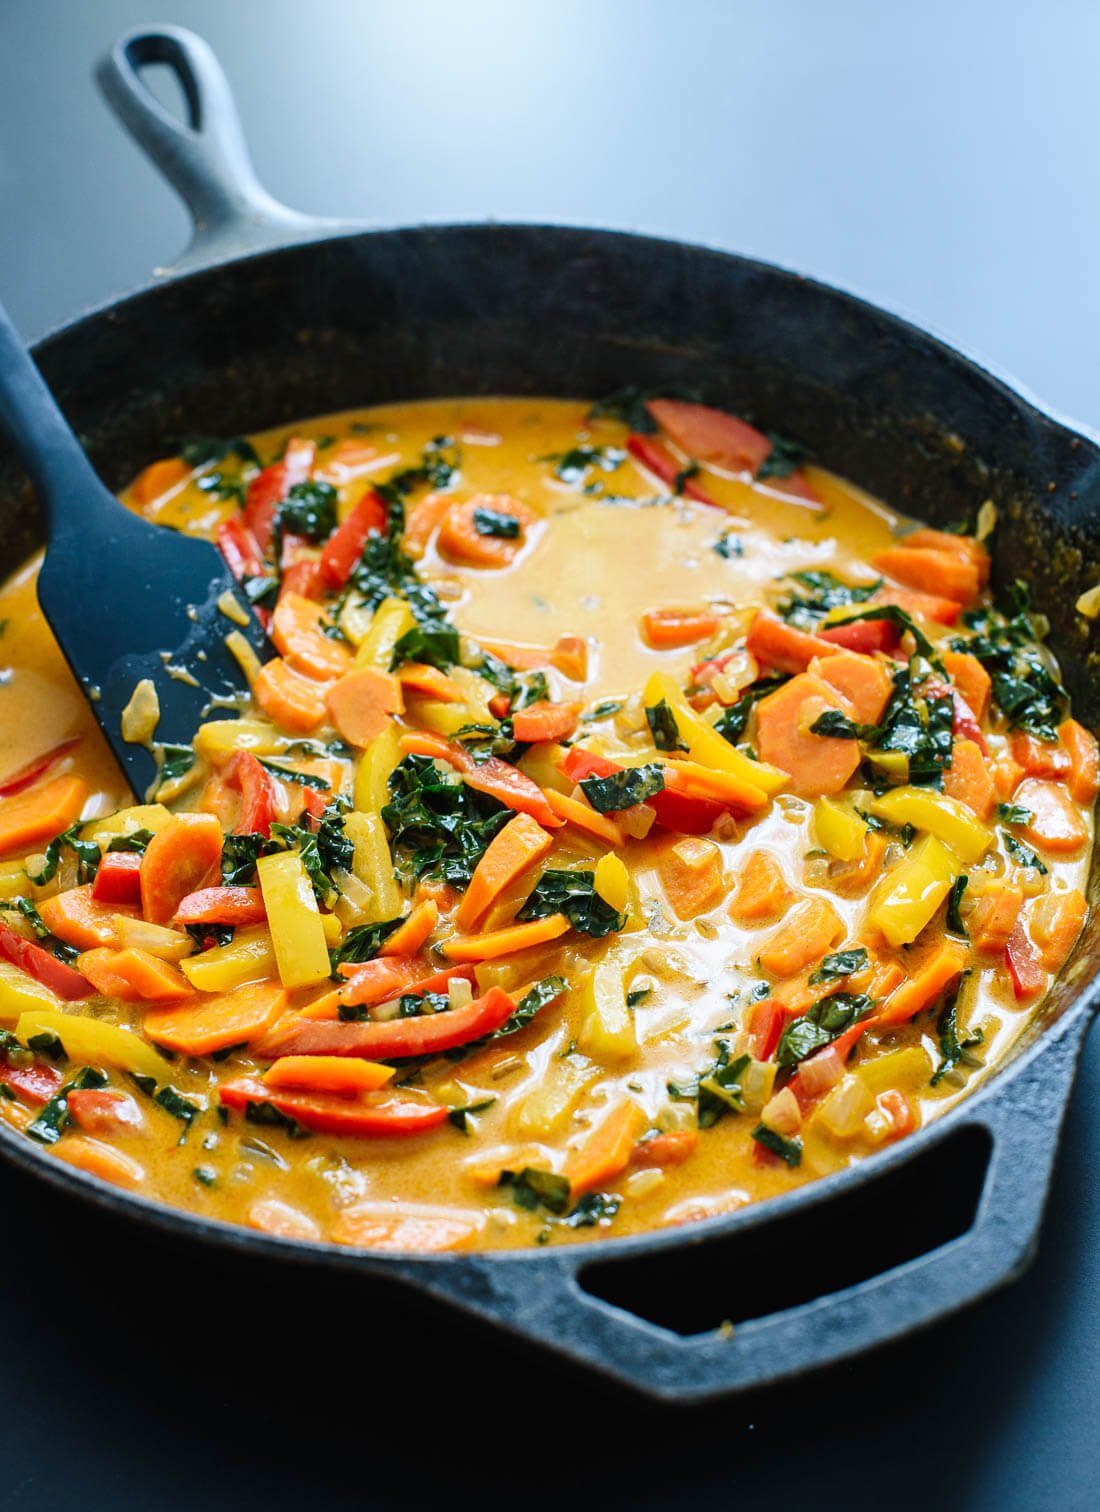 This Thai red curry with vegetables is the best! cookieandkate.com